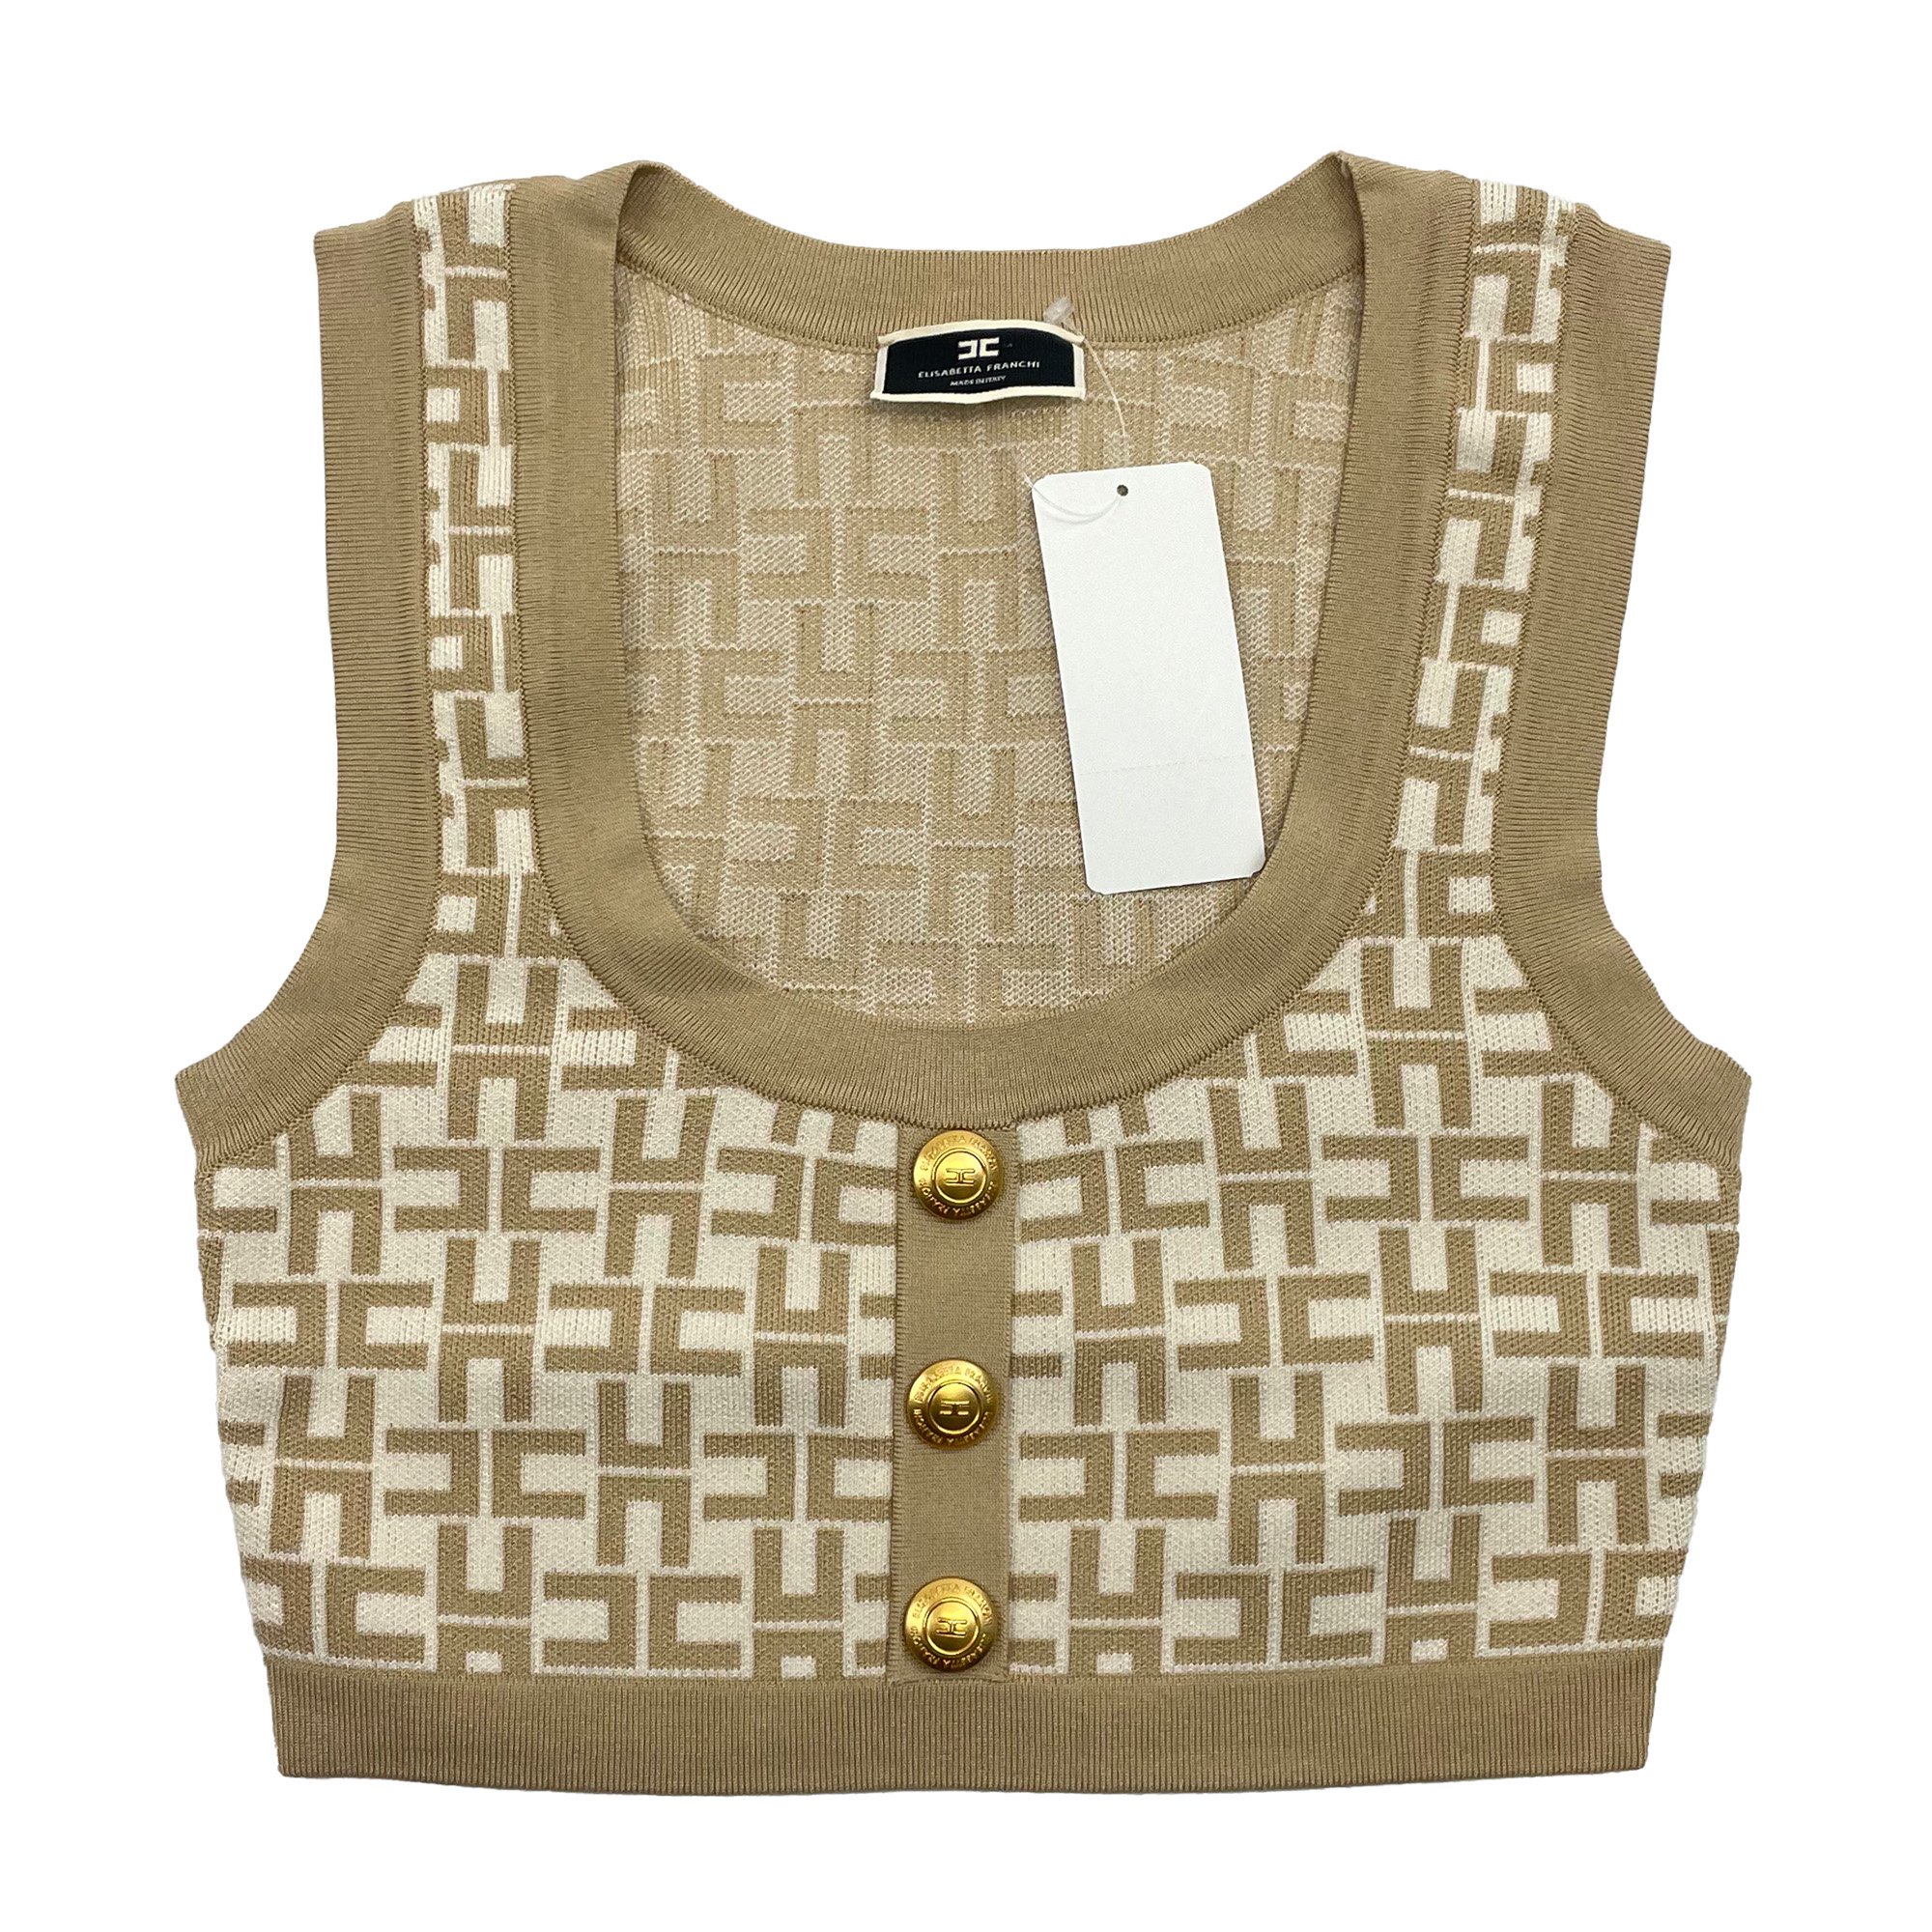 <img class='new_mark_img1' src='https://img.shop-pro.jp/img/new/icons7.gif' style='border:none;display:inline;margin:0px;padding:0px;width:auto;' />ELISABETTA FRANCHI N/S KNIT VEST